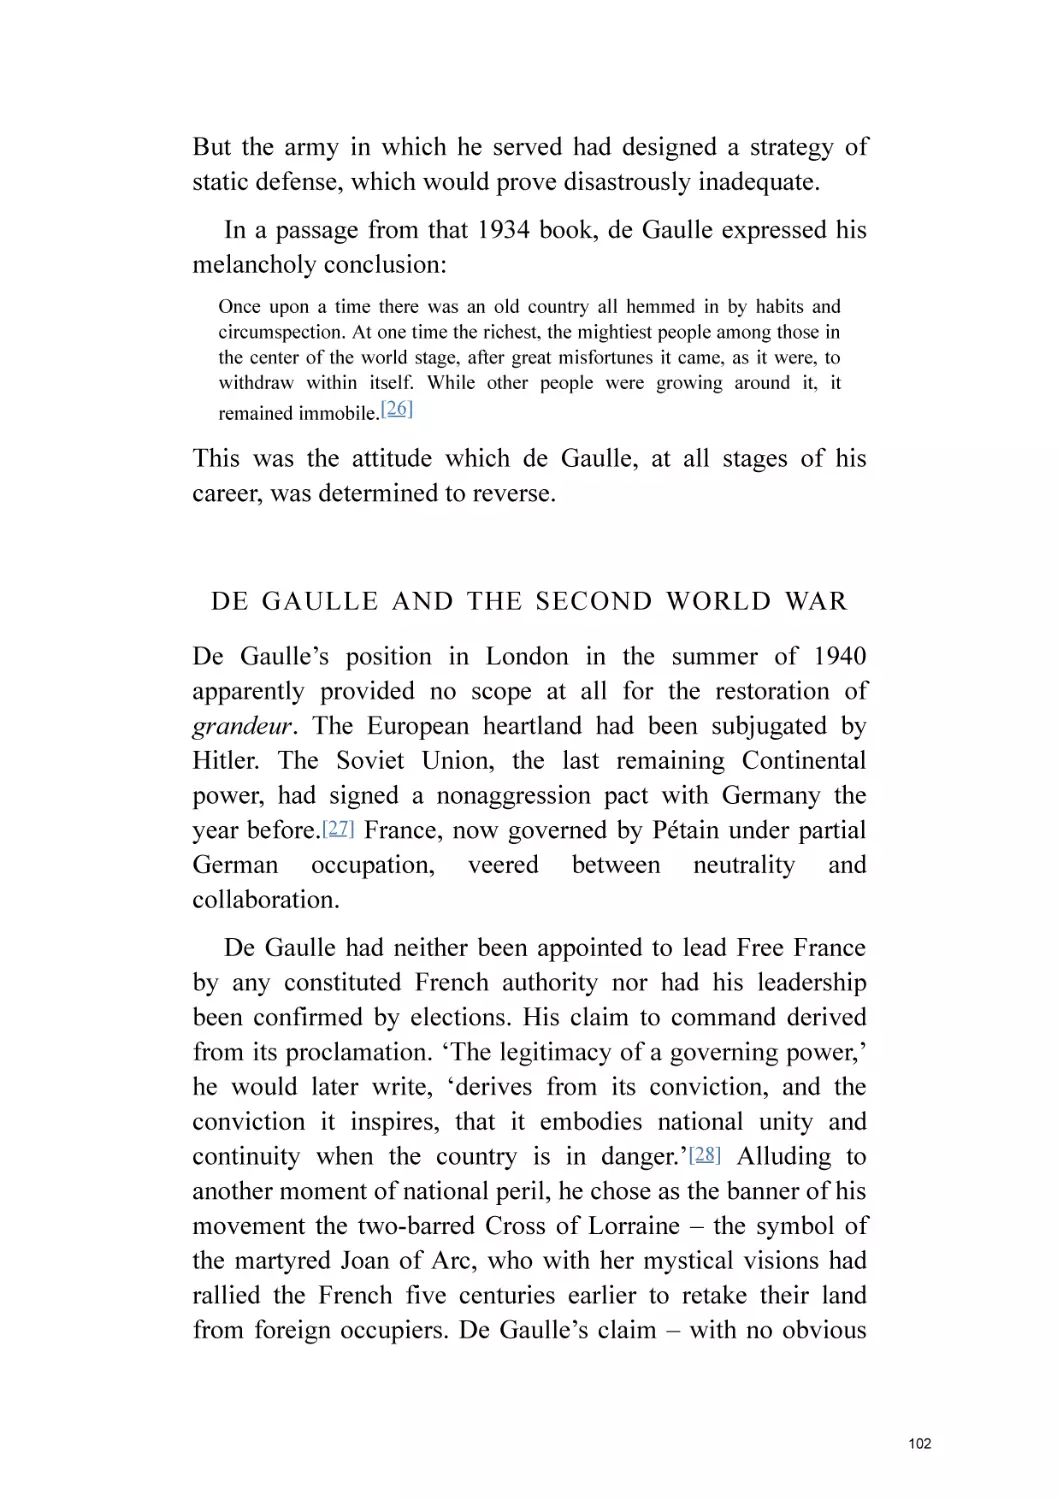 De Gaulle and the Second World War